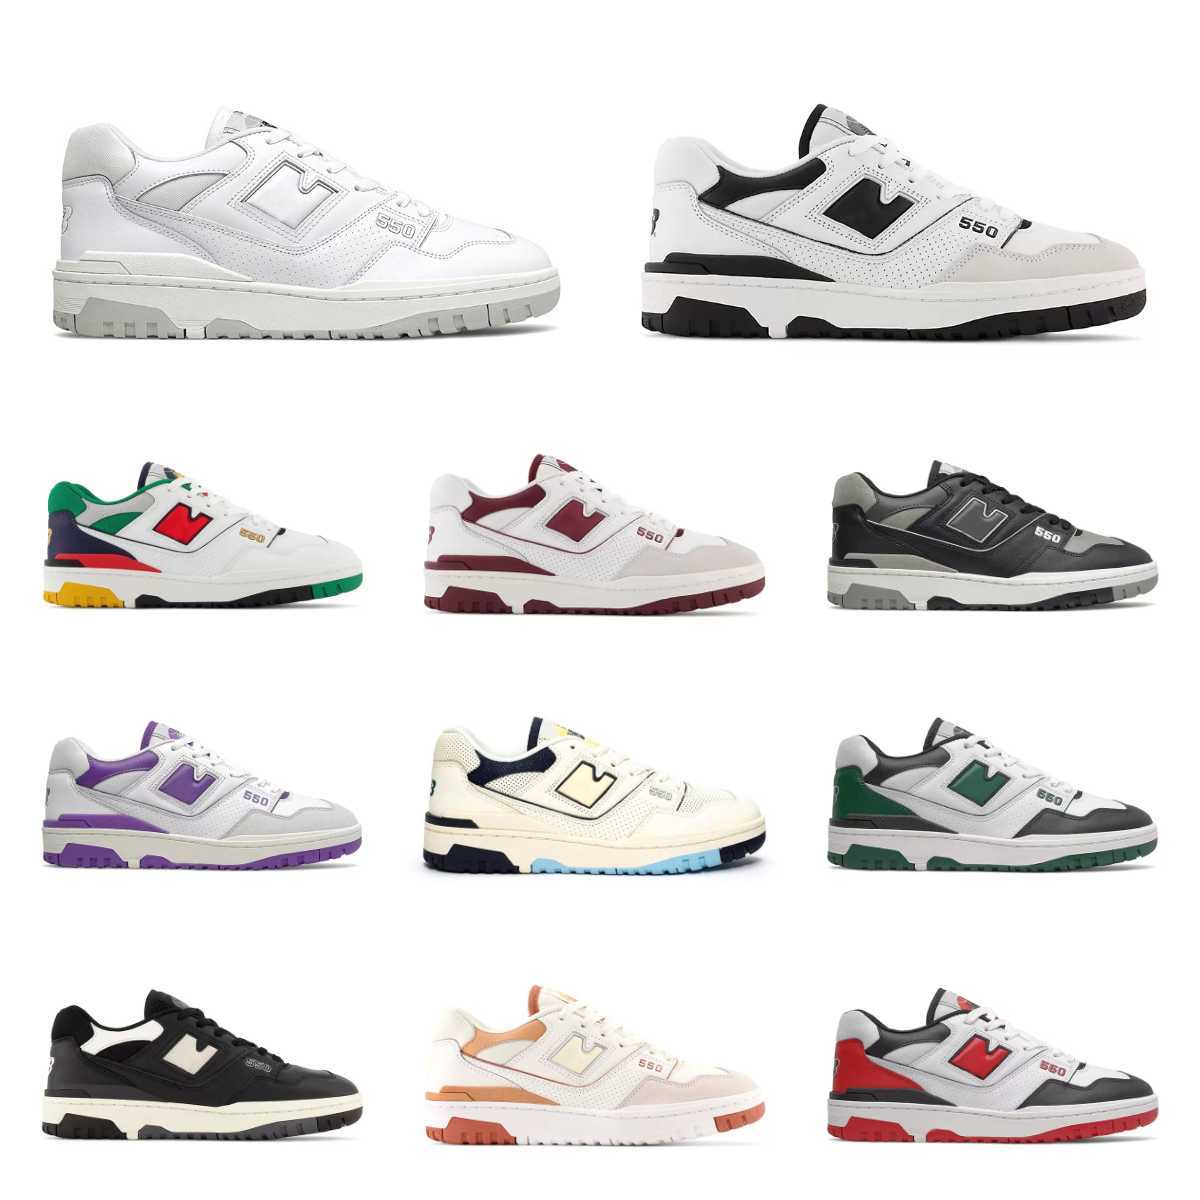 

New 550 Running Shoes Casual Men Women Sneakers White Green Black Grey UNC Bb 550s Amongst AURALEE Varsity Gold Shadow Mens Nb Womens Sports Outdoor Niksneakers, Ask the seller about some sizes